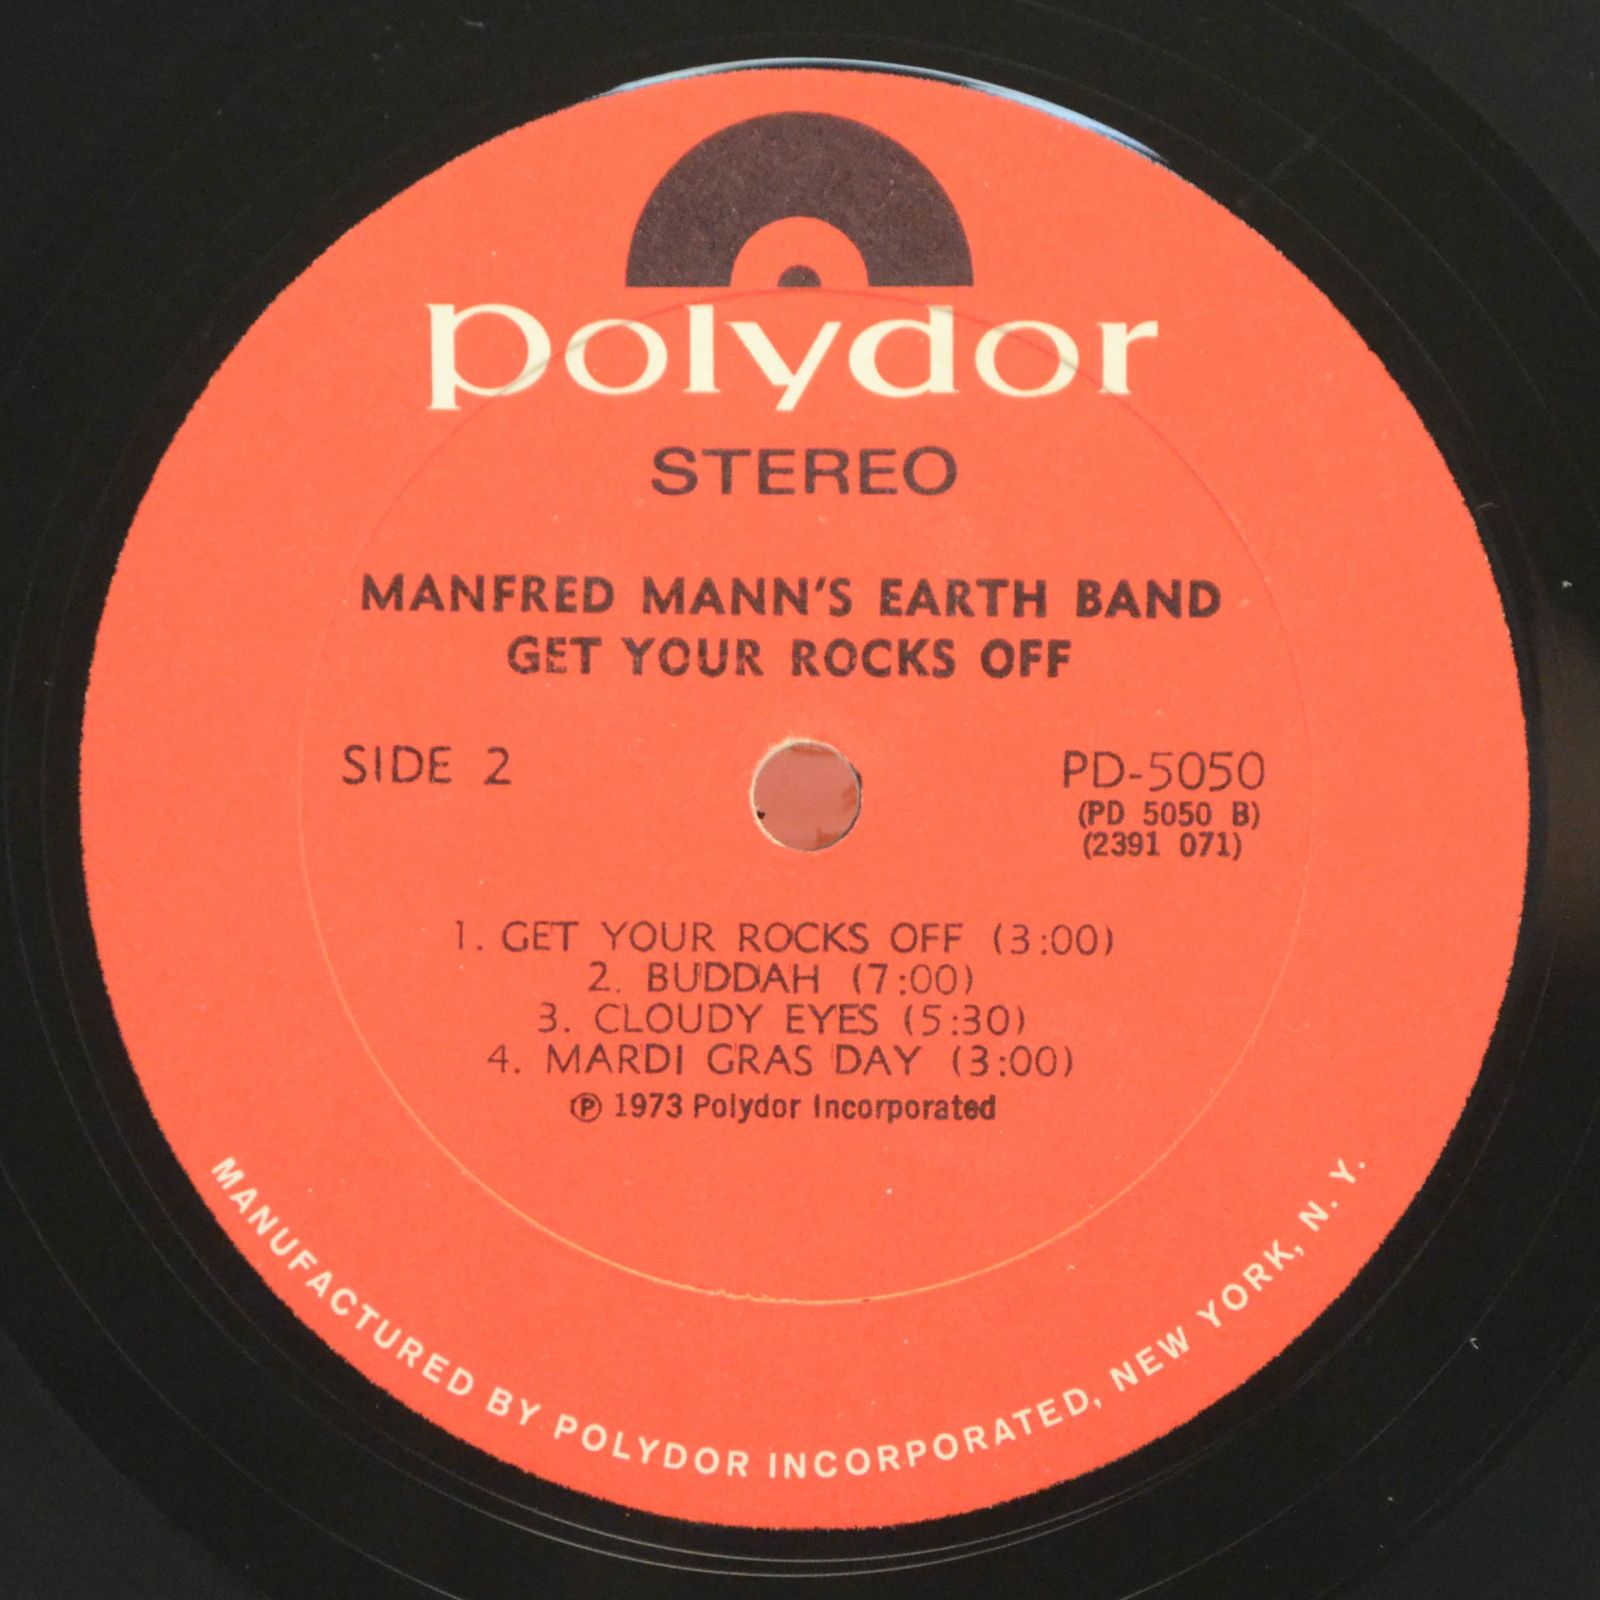 Manfred Mann's Earth Band — Get Your Rocks Off (USA), 1973